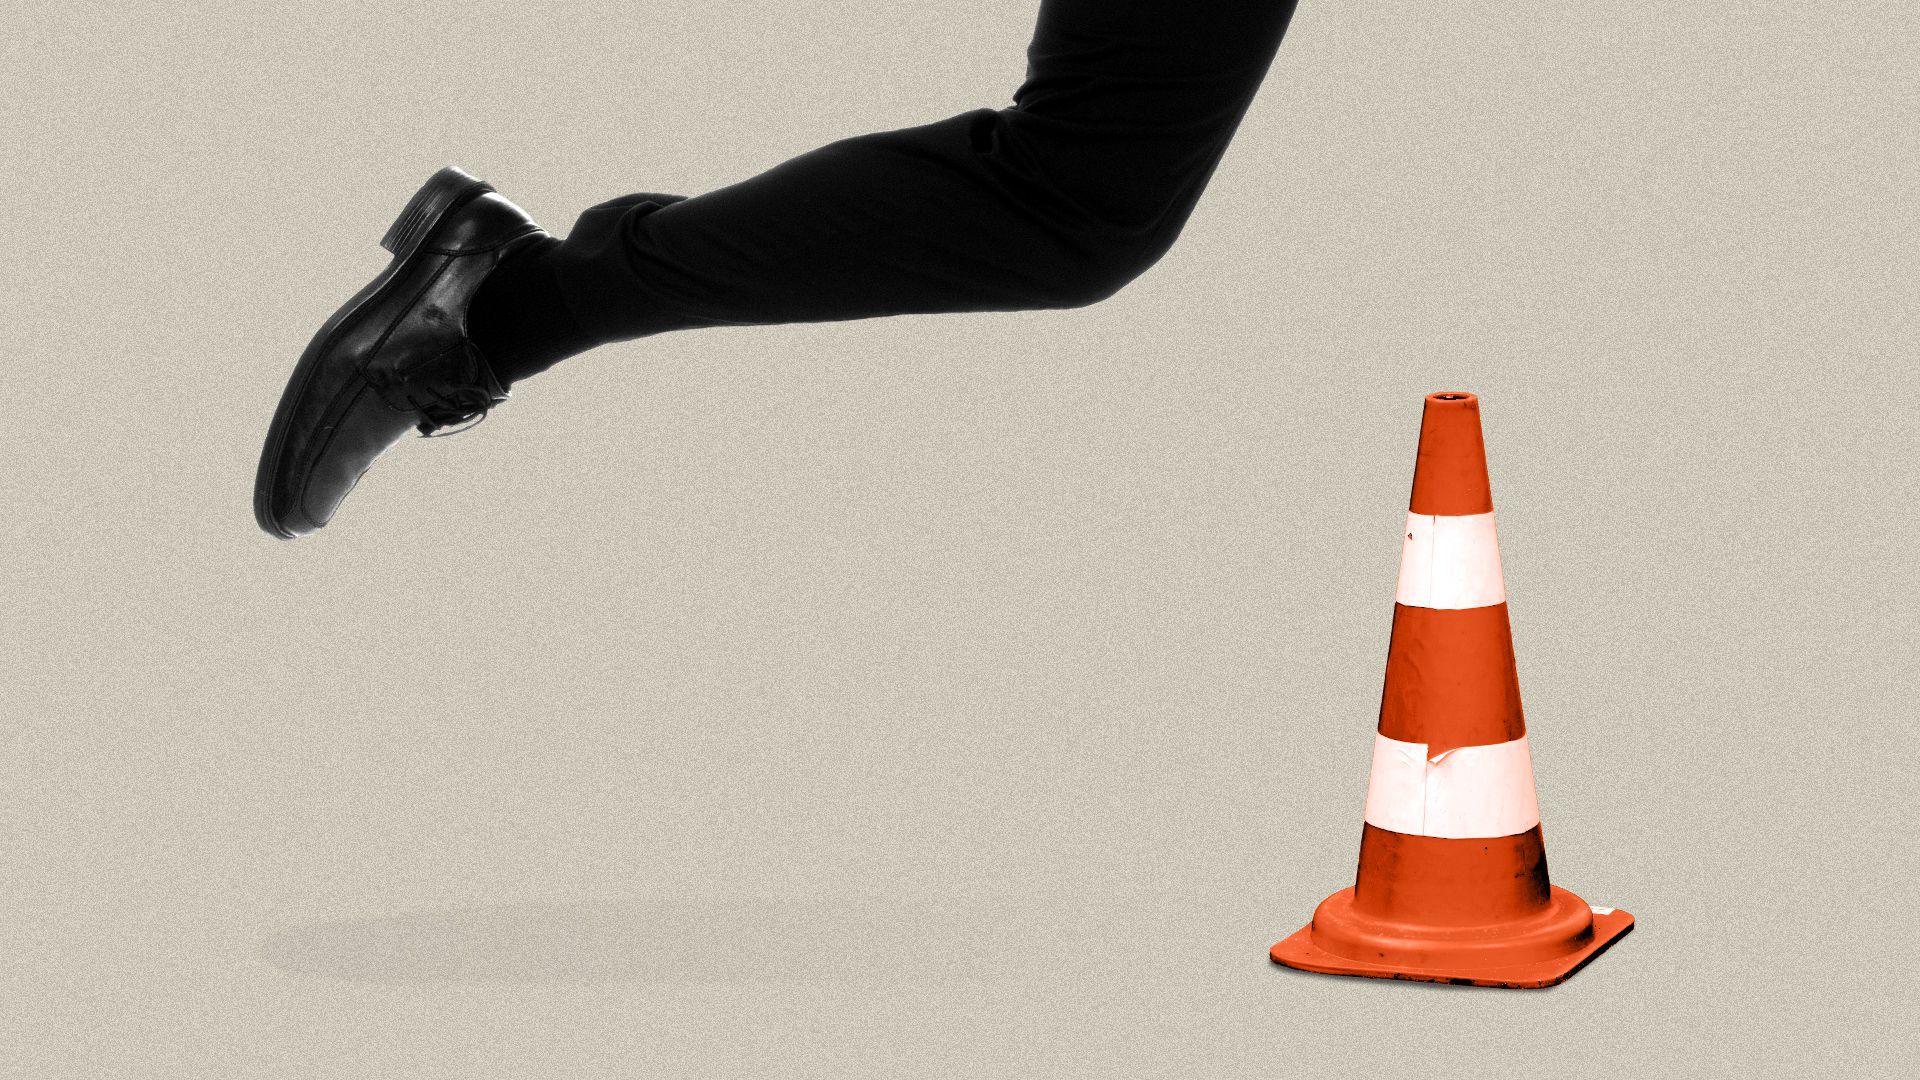 Illustration of a traffic cone about to be kicked by a leg in a business suit and dress shoe.